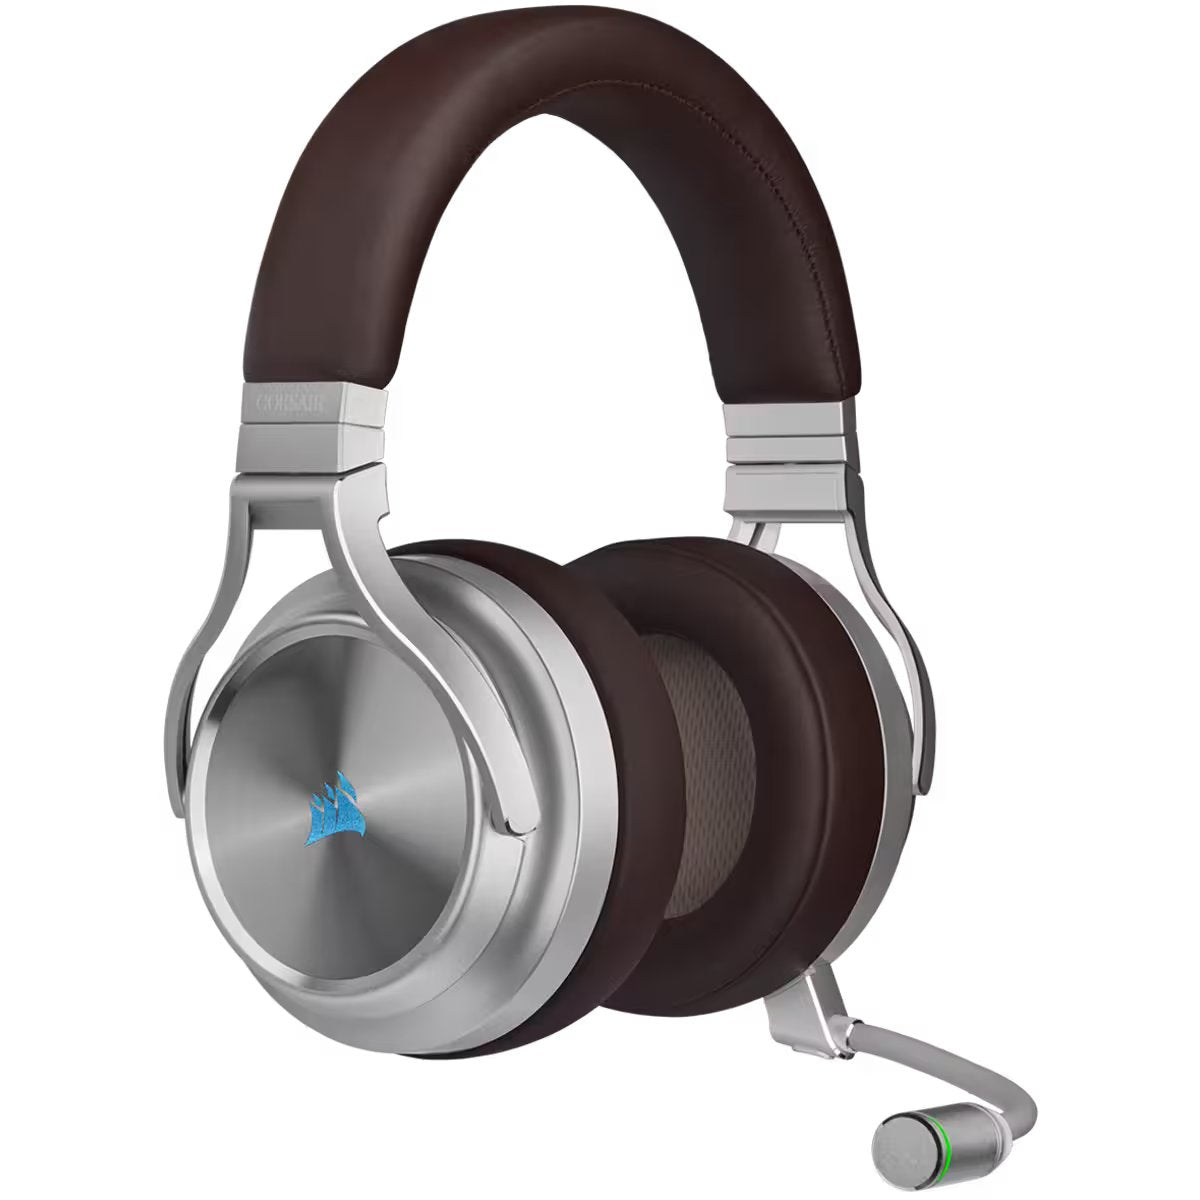 CORSAIR Virtuoso iCUE RGB Wireless SE High Fidelity Gaming Headset with 9.5mm Broadcast-Grade Microphone, Slipstream / USB and 3.5mm Wired Connectivity, and Up to 20 Hrs Battery for PC Laptop and Consoles (Espresso) | CA-9011181-AP